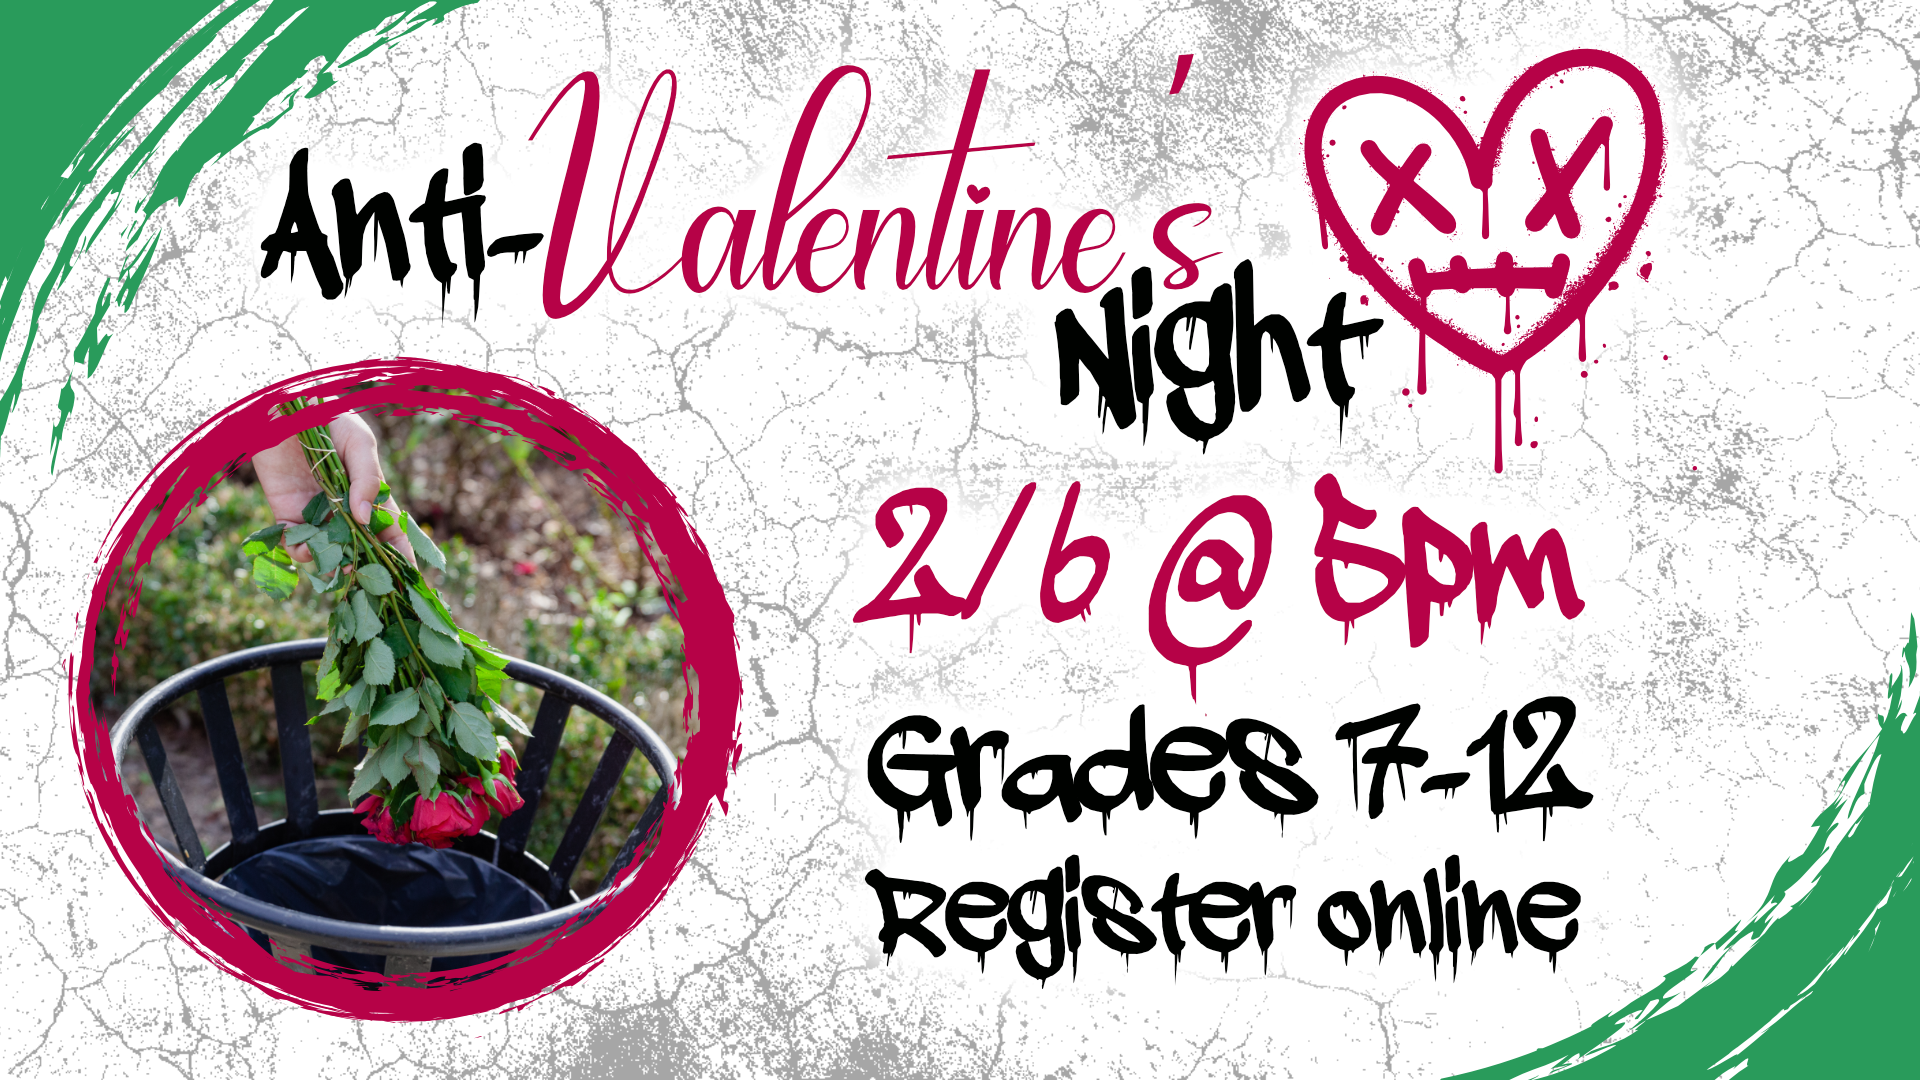 Anti-Valentine's Night, February 6th at 5pm, intended for grades 7 through 12, registration required